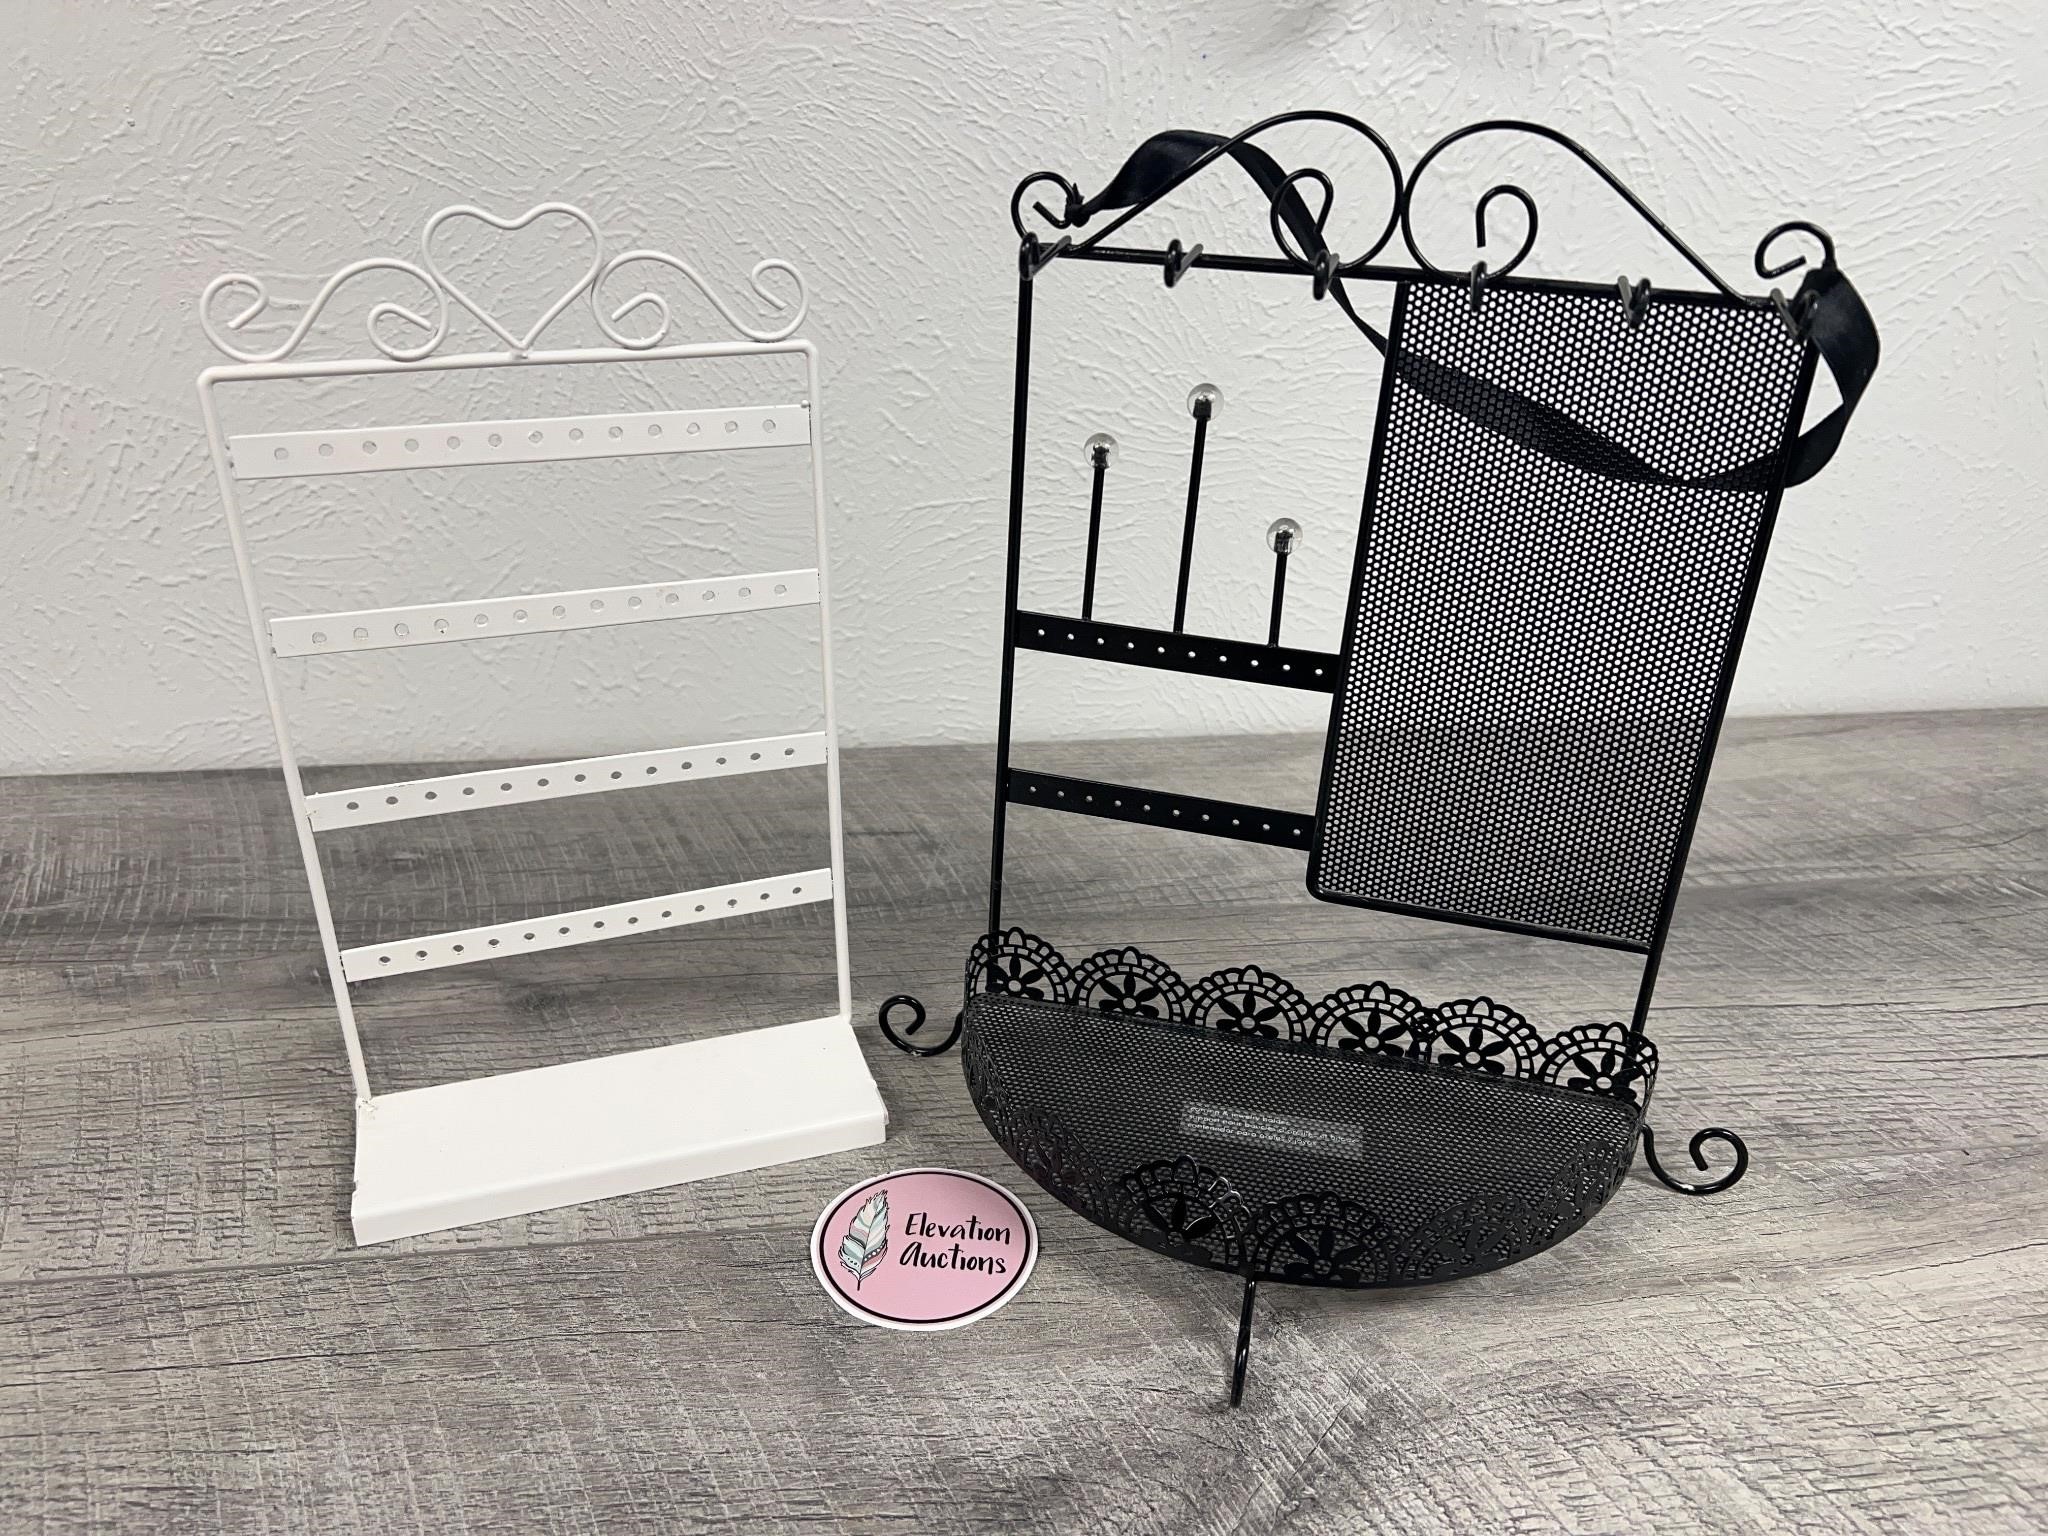 2 metal jewelry holders and displays